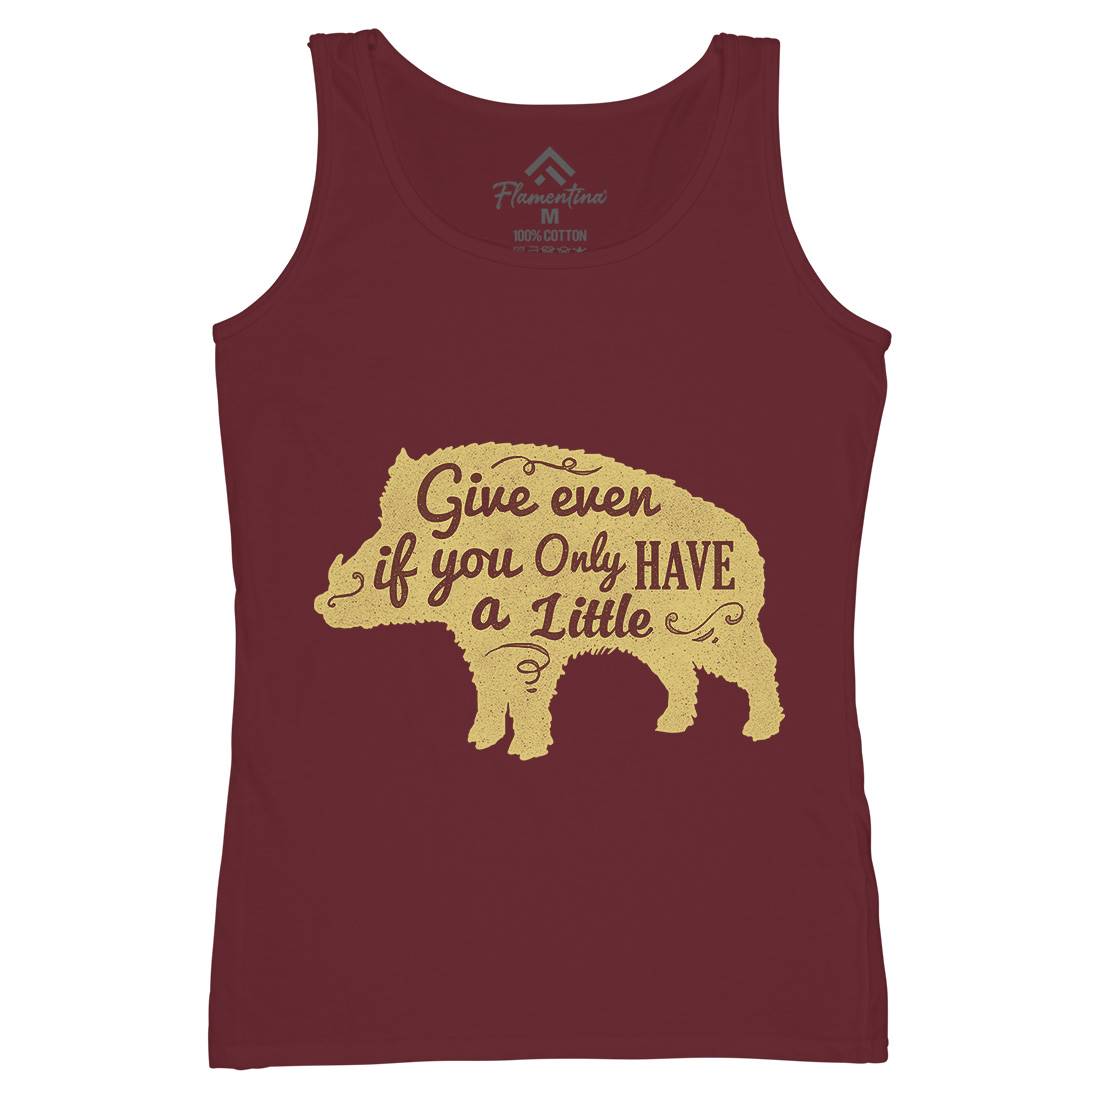 Give Even Womens Organic Tank Top Vest Religion A318